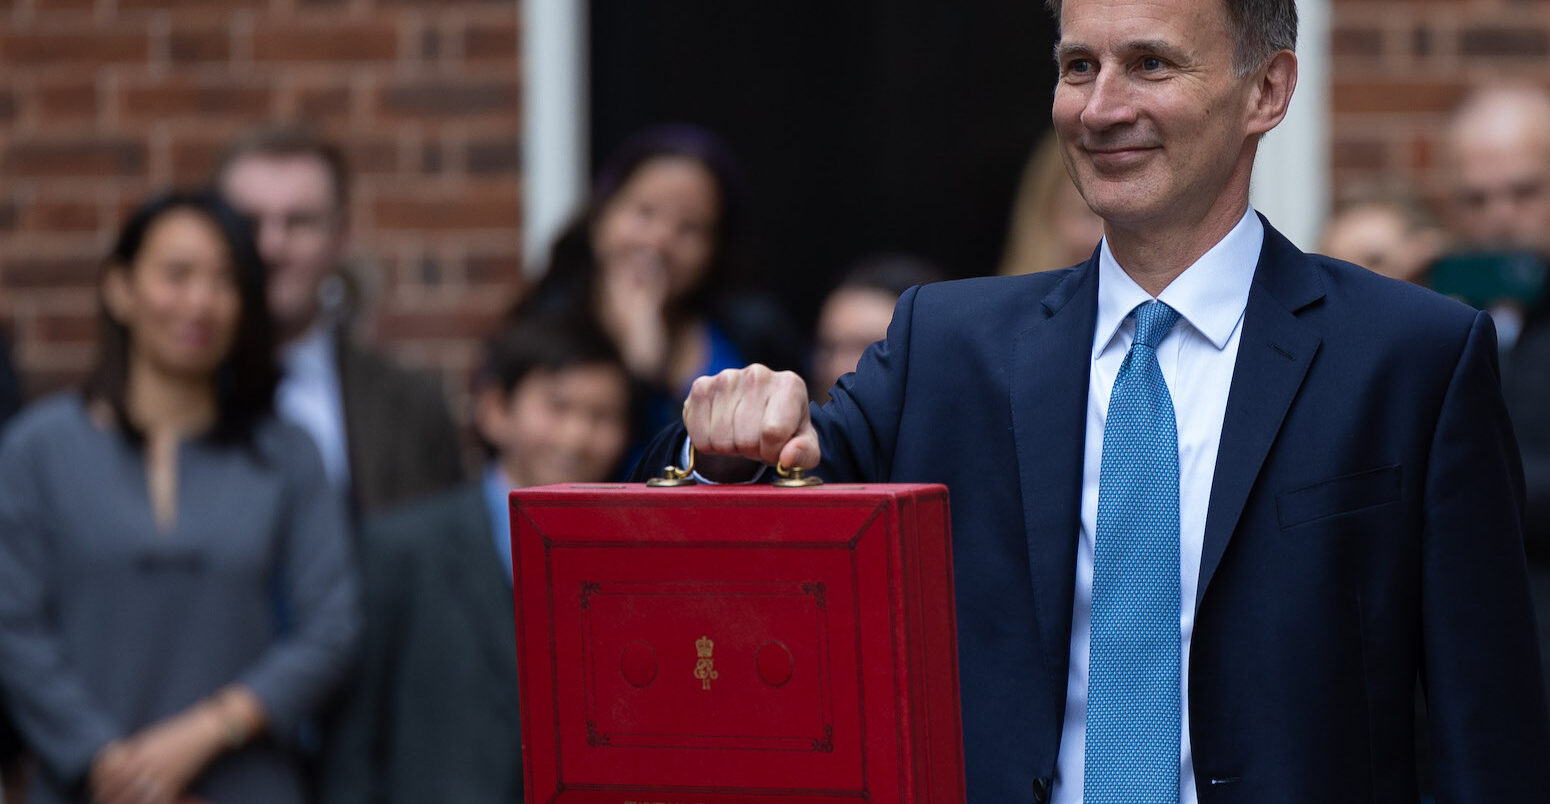 The Chancellor of the Exchequer Jeremy Hunt, accompanied by his ministerial team and watched by his wife and children, leaves 11 Downing Street on his way to deliver the budget on March 15, 2023.